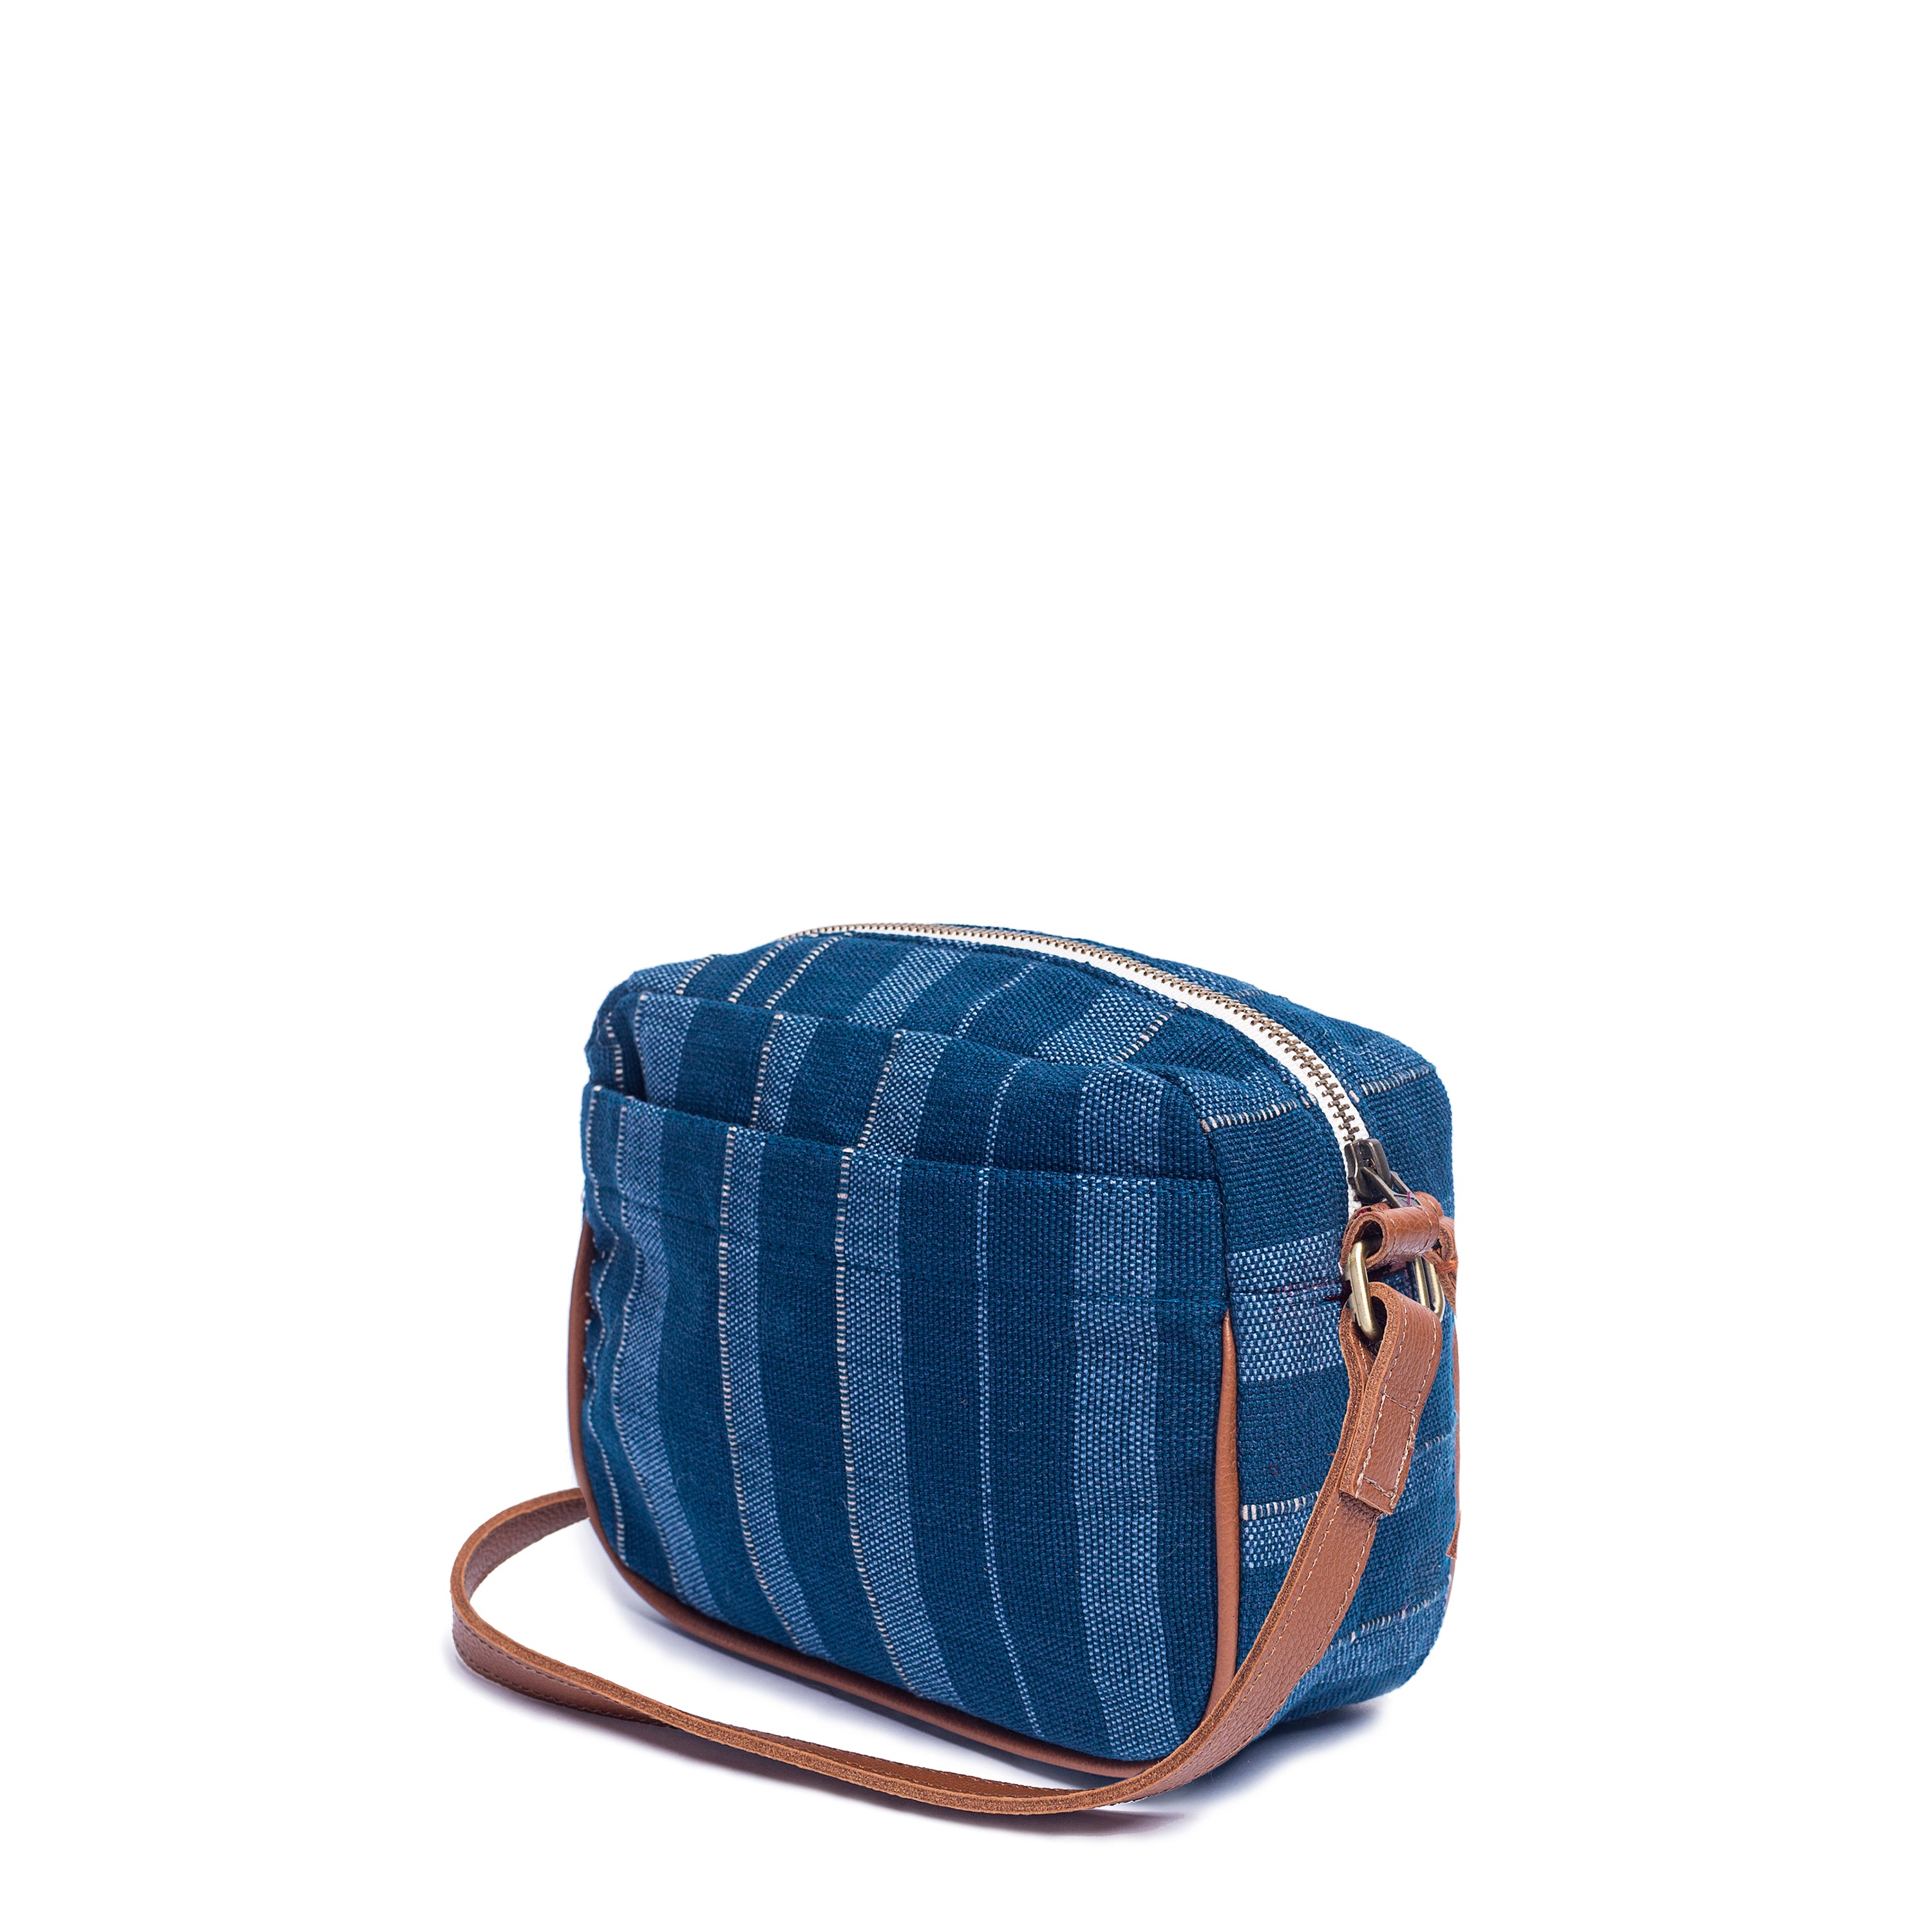 A side view of the hand woven artisan Juana Crossbody in Sky Haze. The Sky Haze pattern has vertical dark blue, lighter blue, and grey stripes. It has a leather vein detailing and leather strap. The top is closed by a zipper.